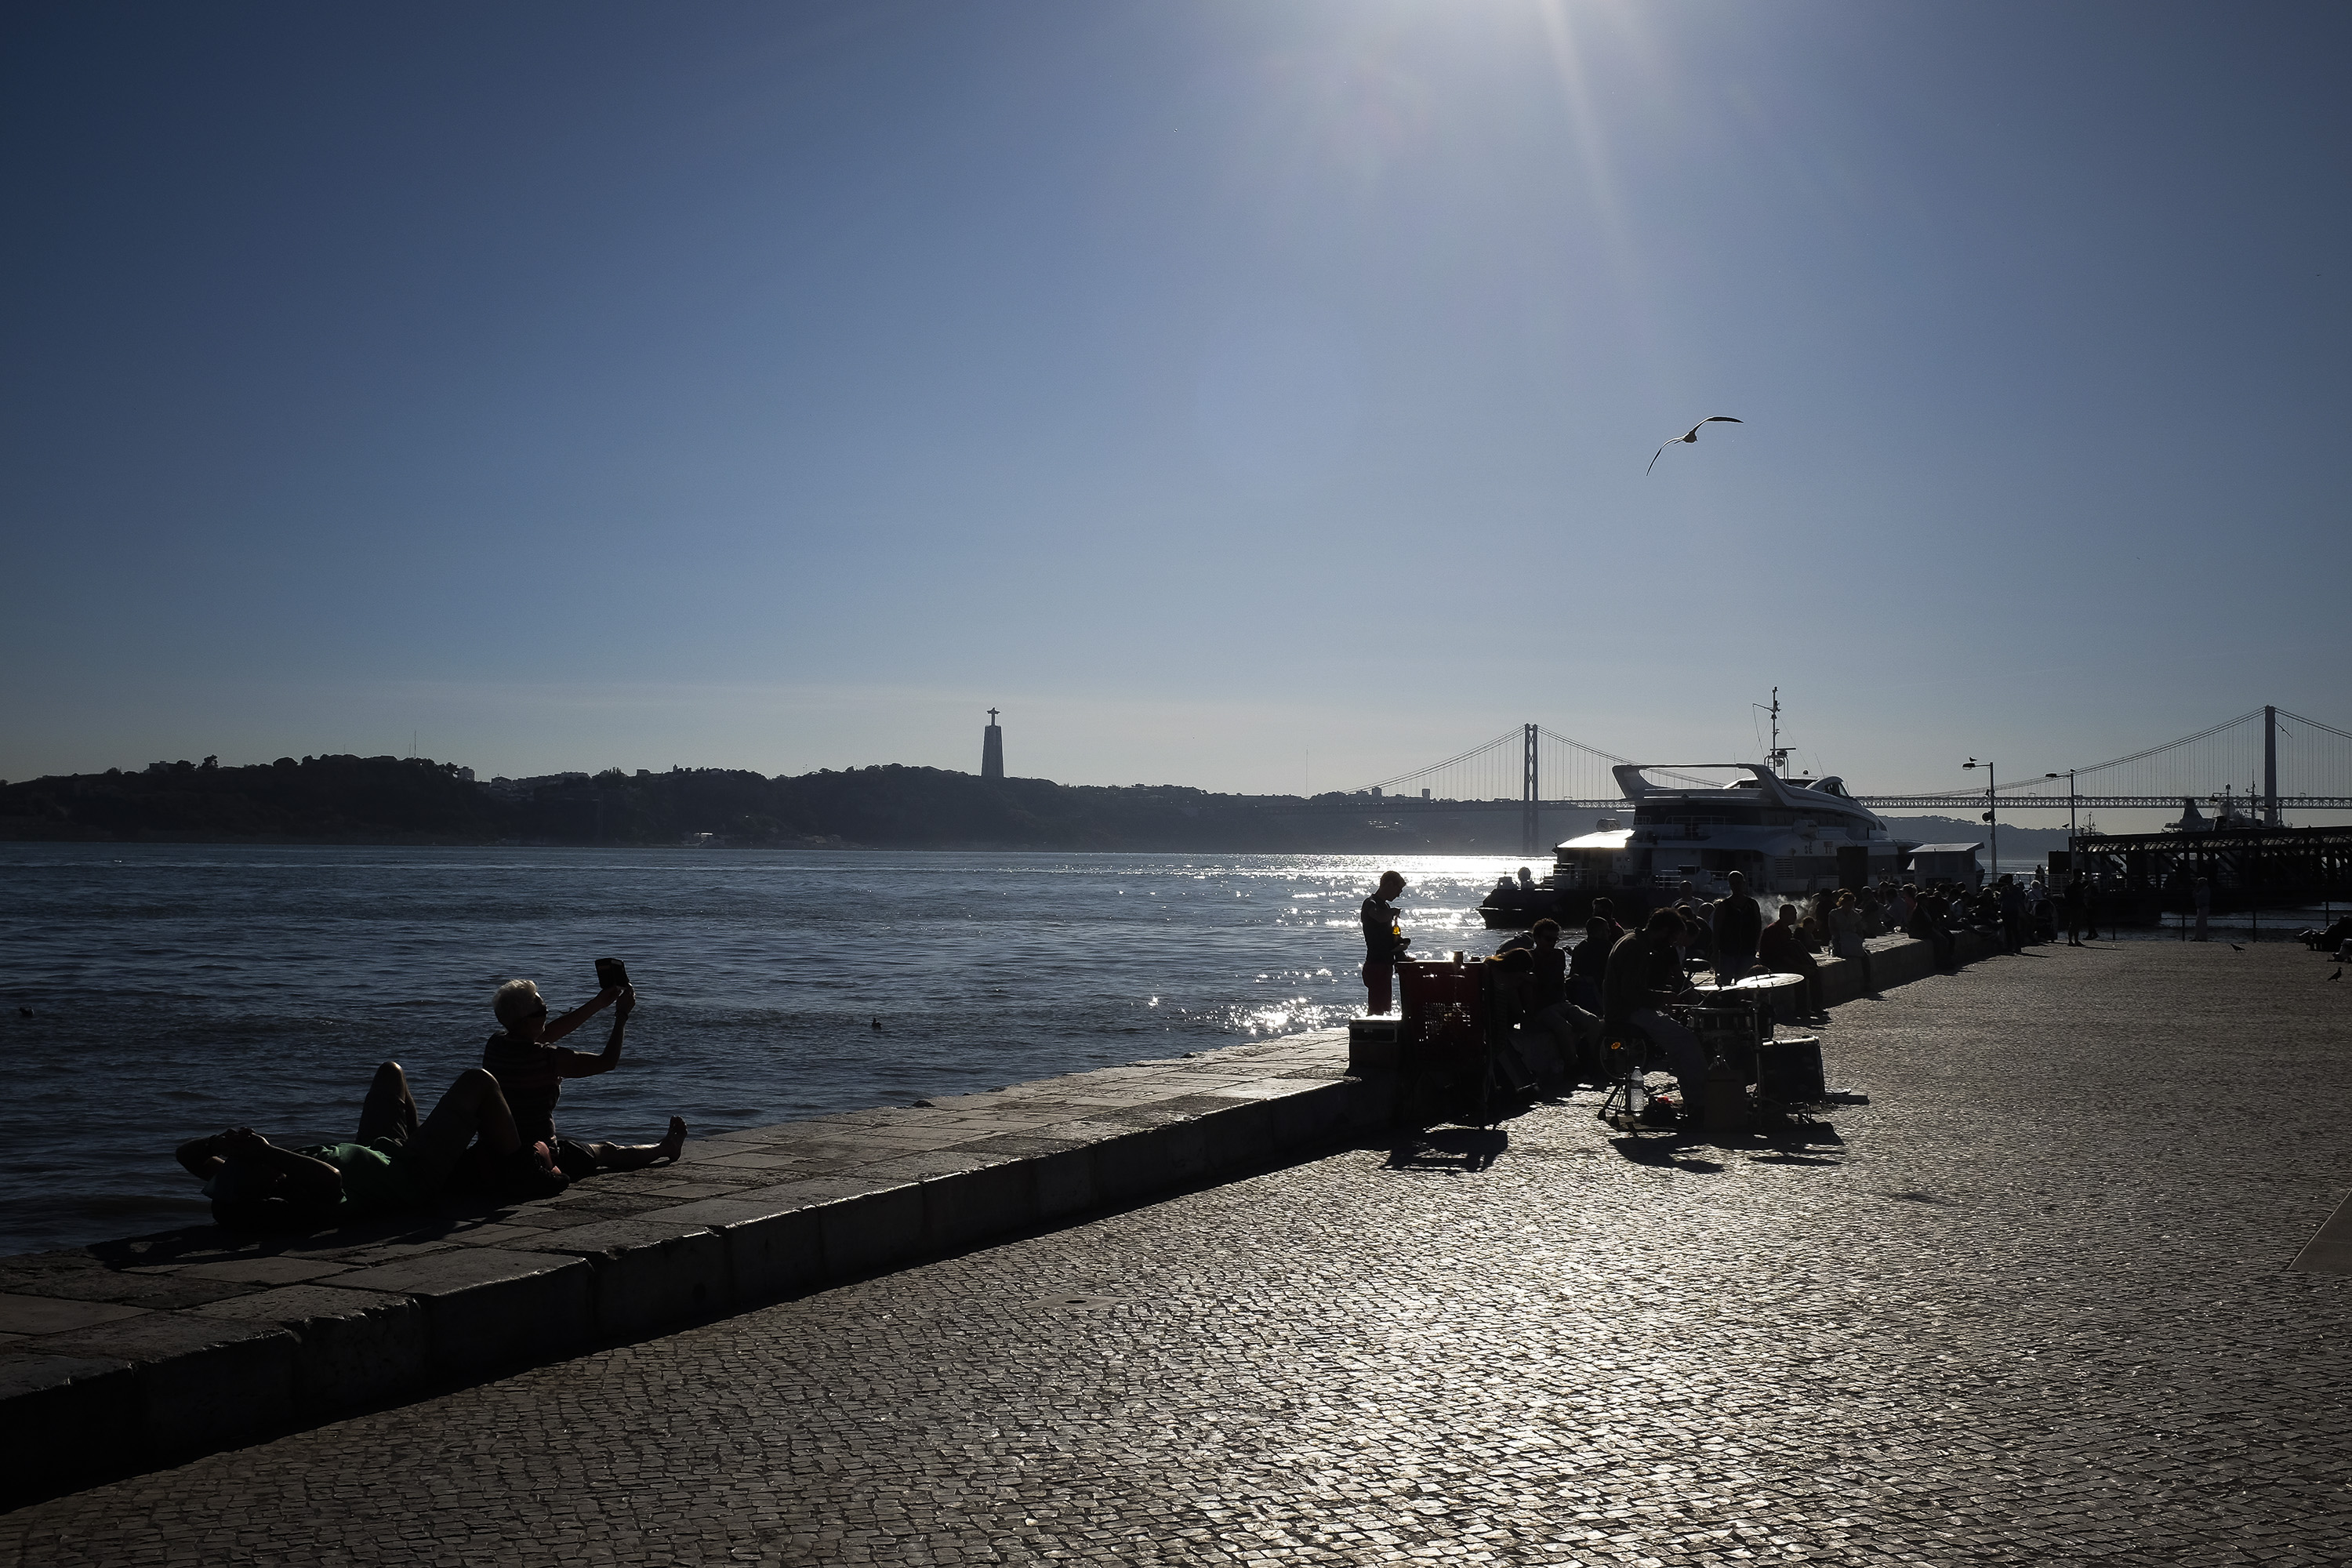 Tagus river by sunset in Lisbon, with a background bridge that shares some similarities with the Golden Gate in San Francisco